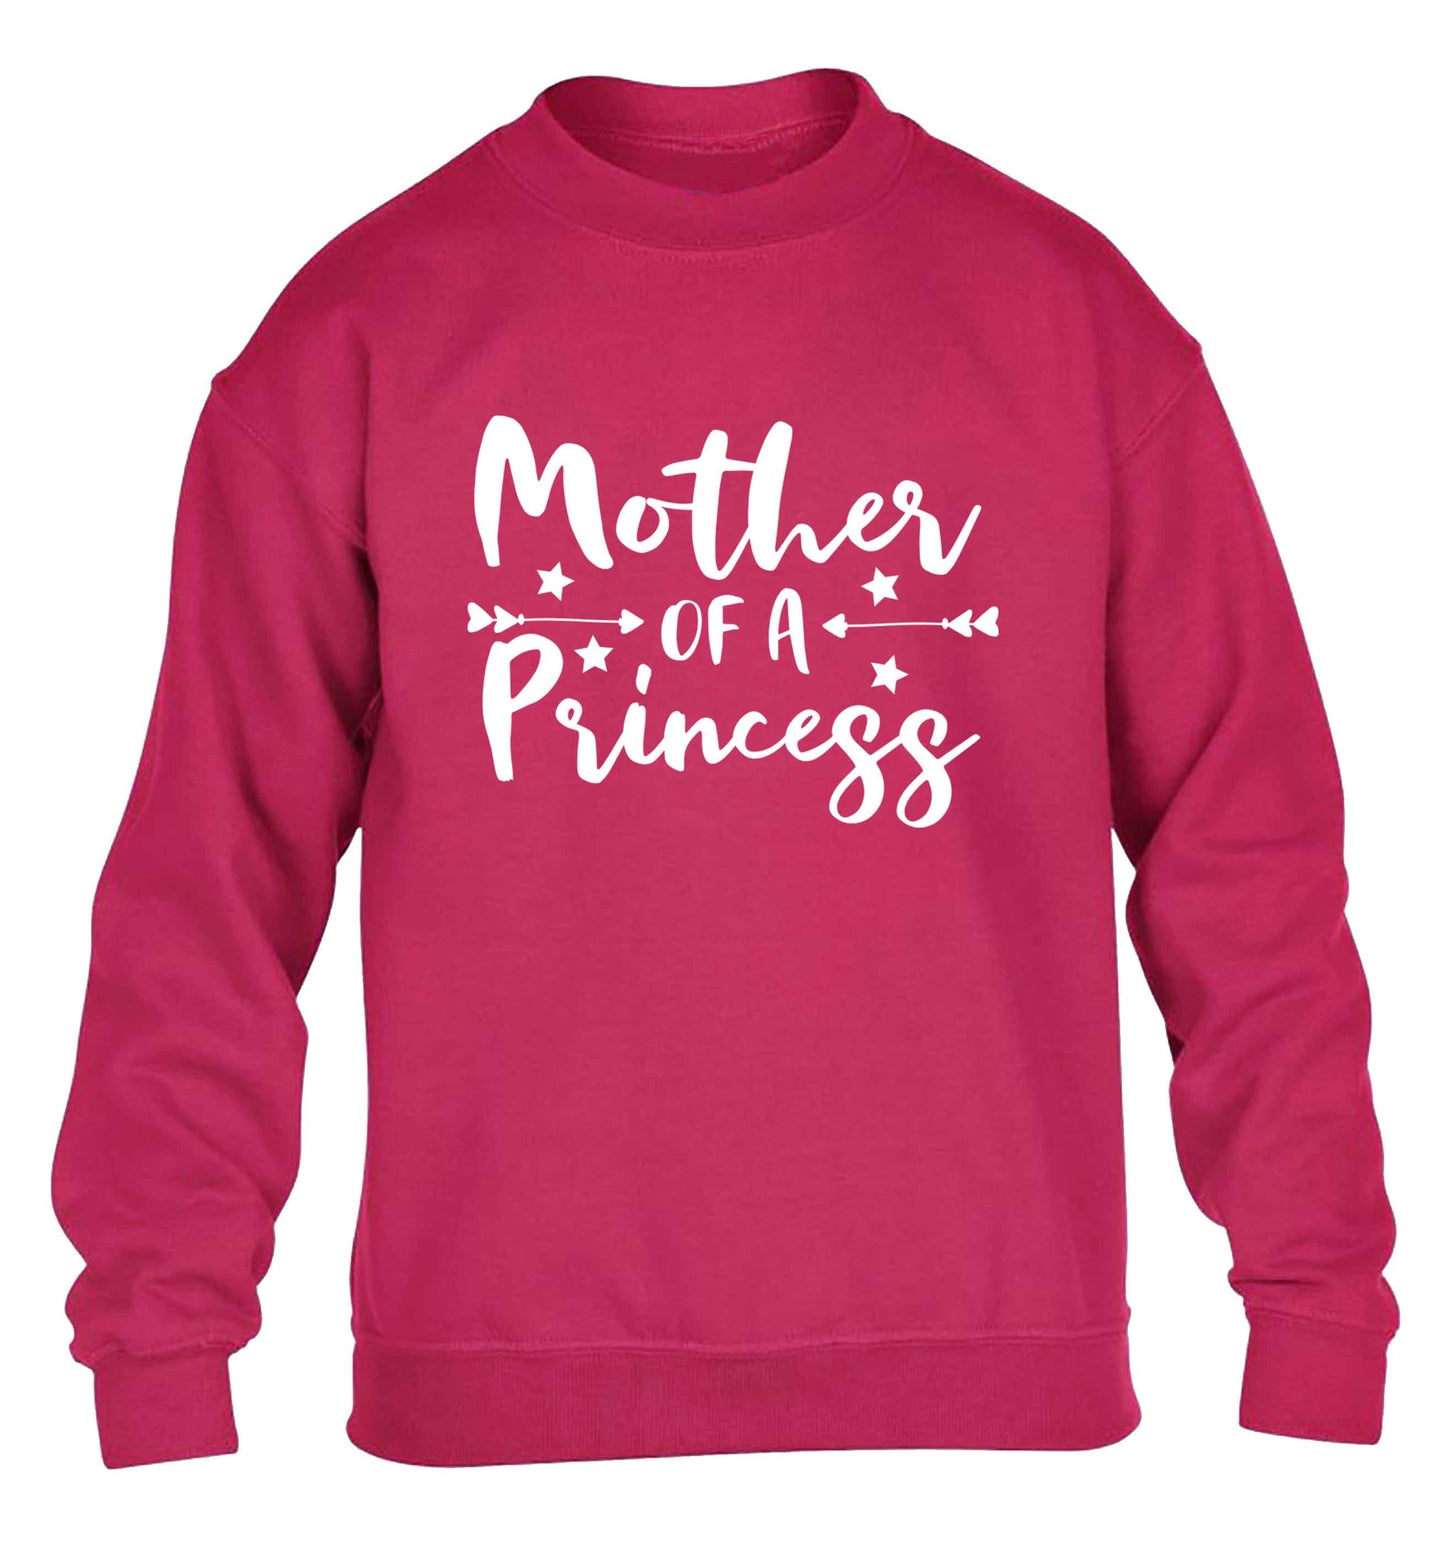 Mother of a princess children's pink sweater 12-13 Years